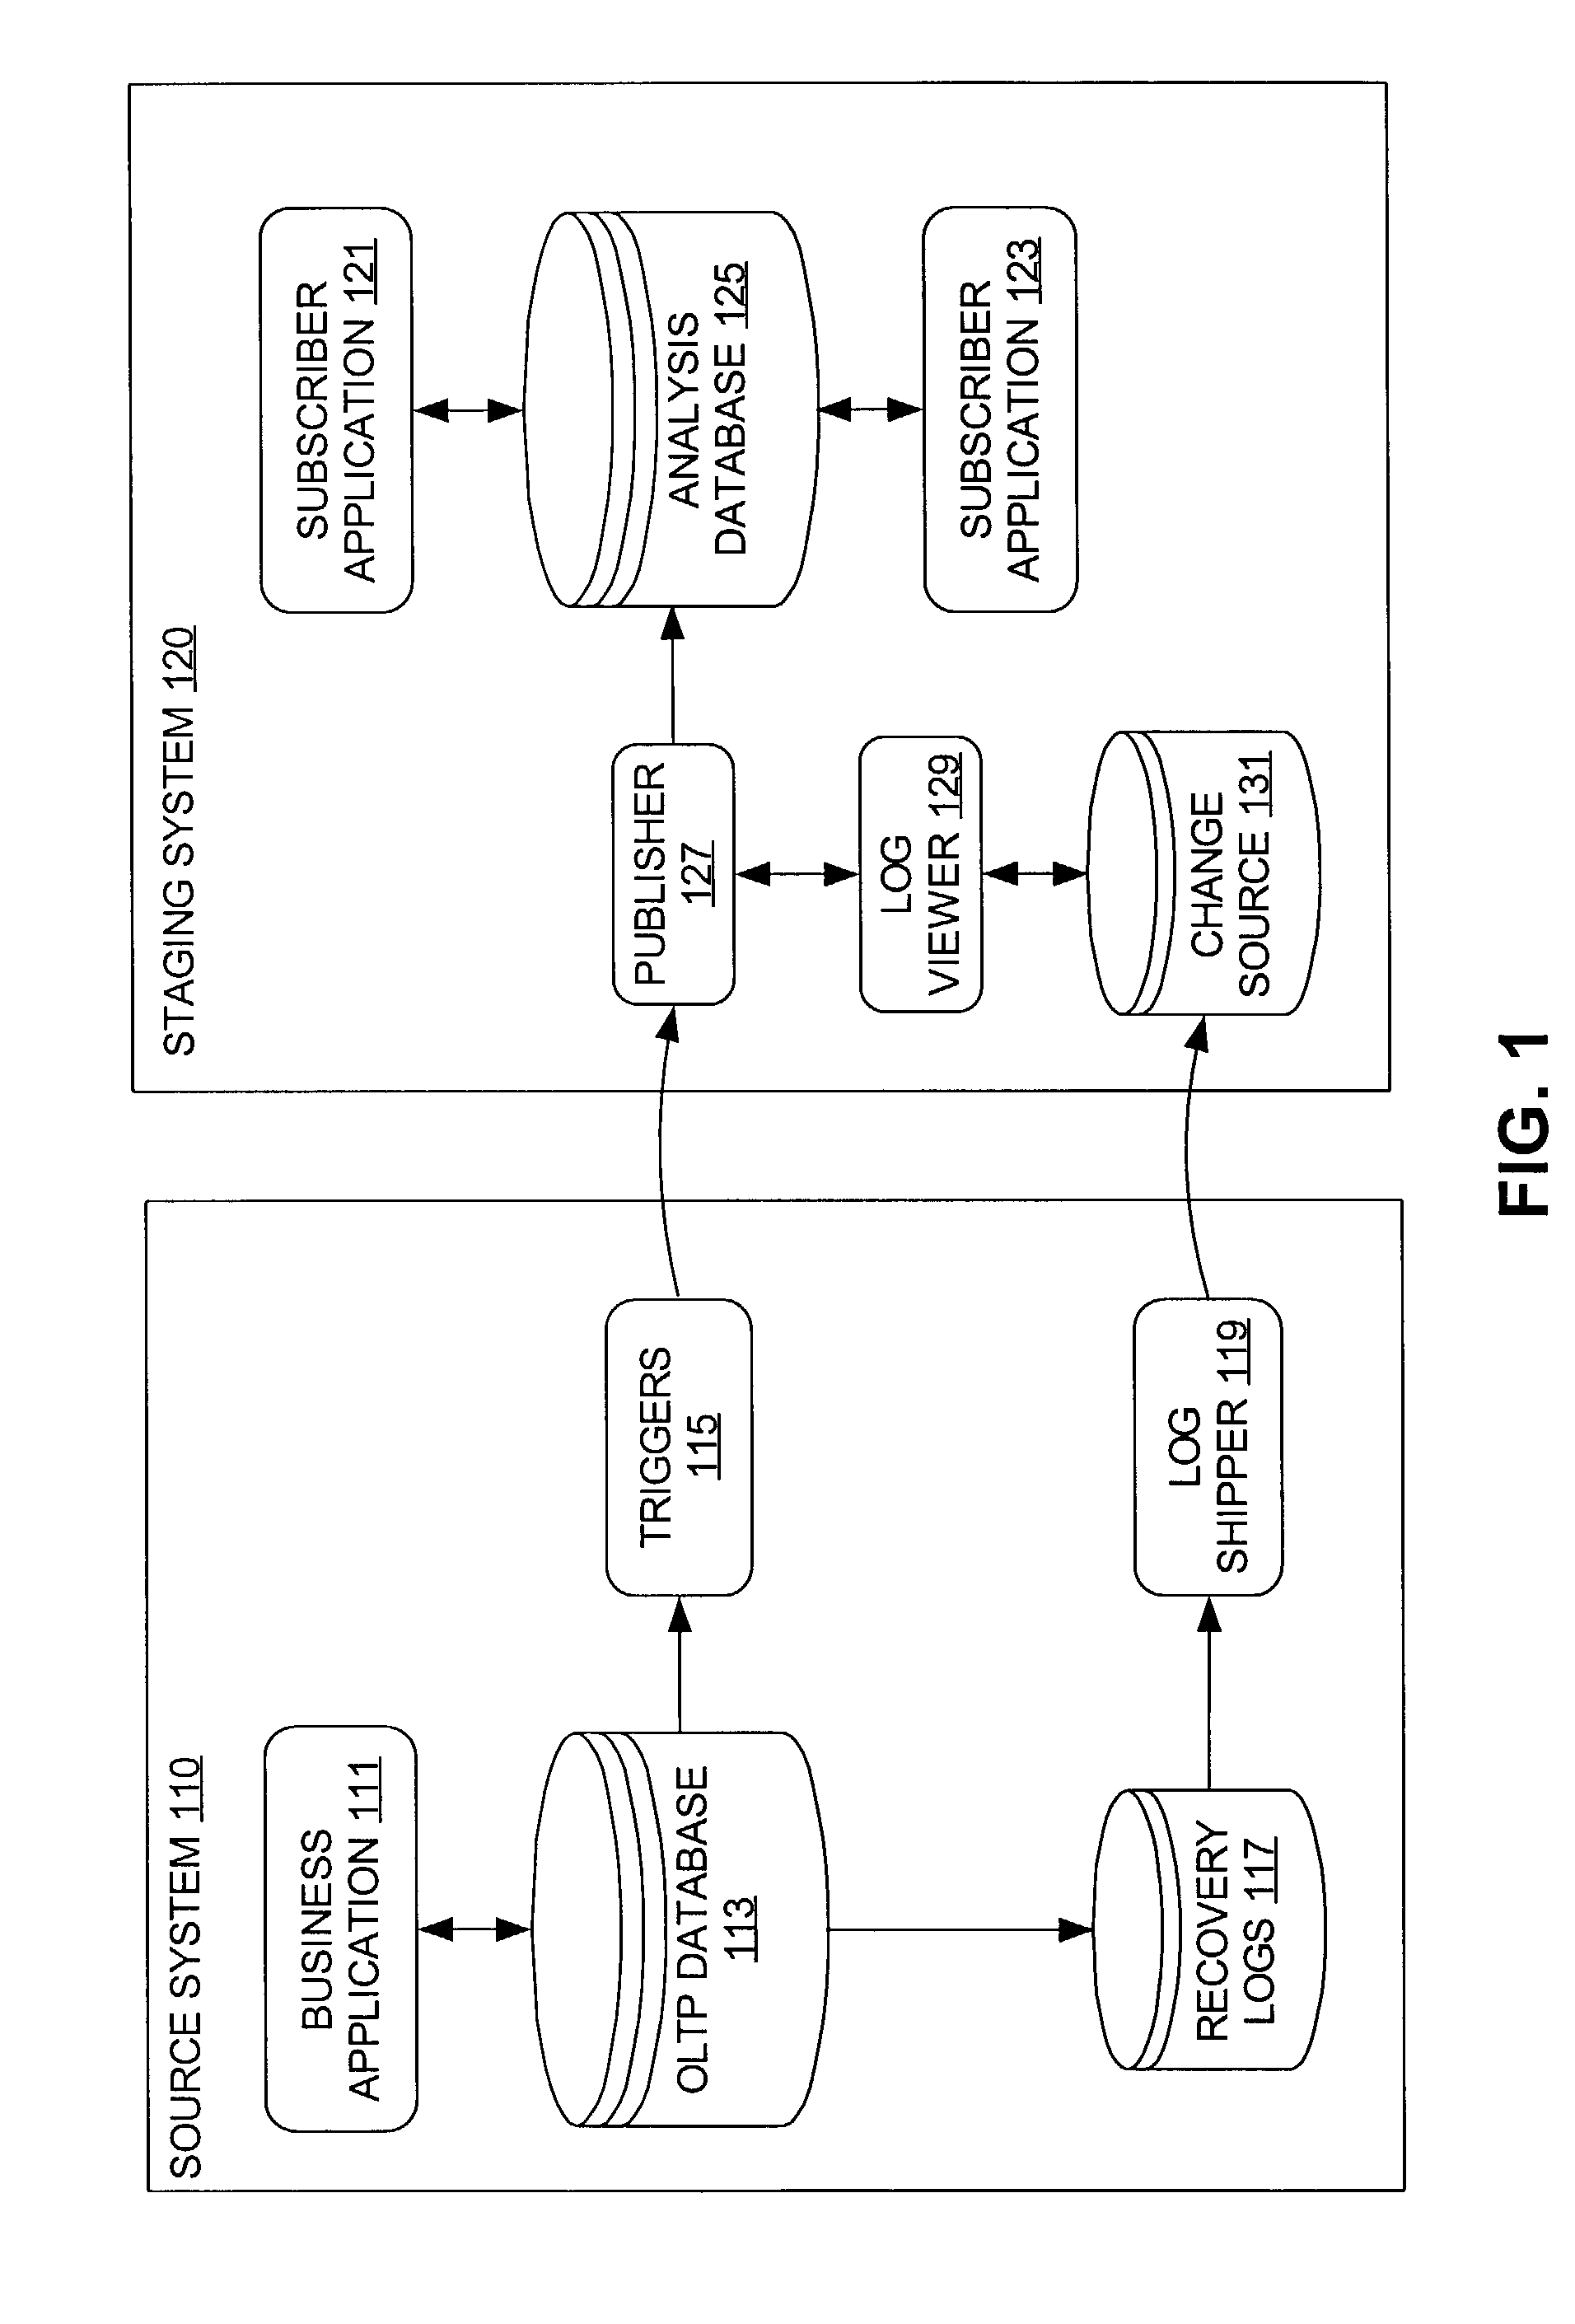 Method and apparatus for change data capture in a database system